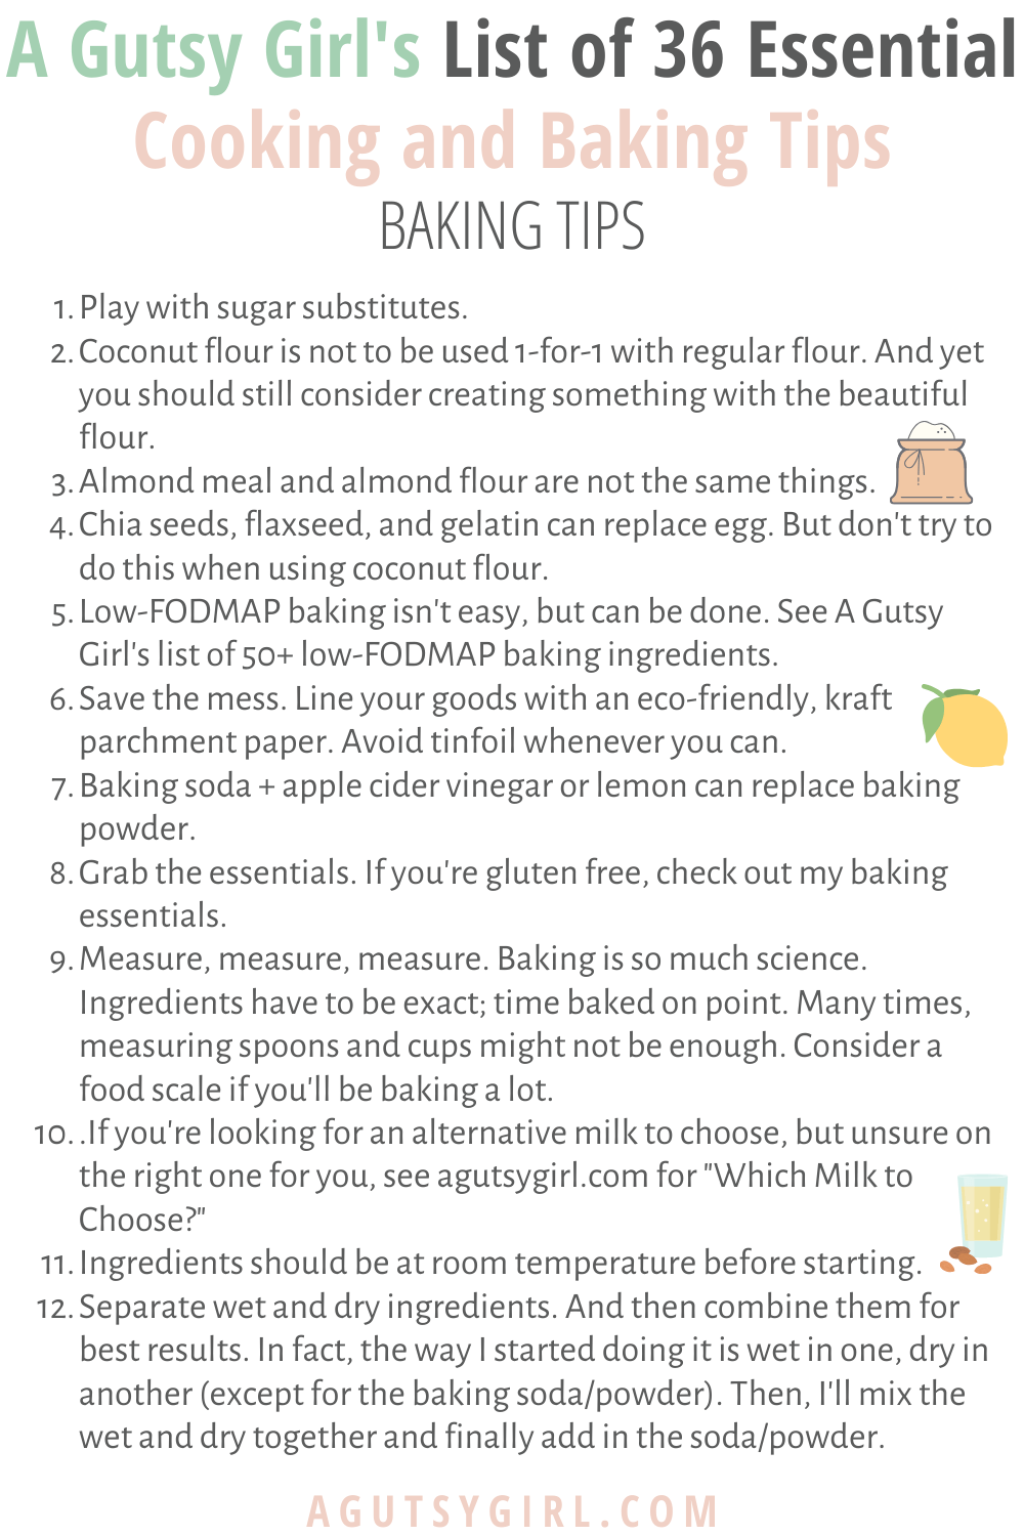 cooking tips list - A Gutsy Girl